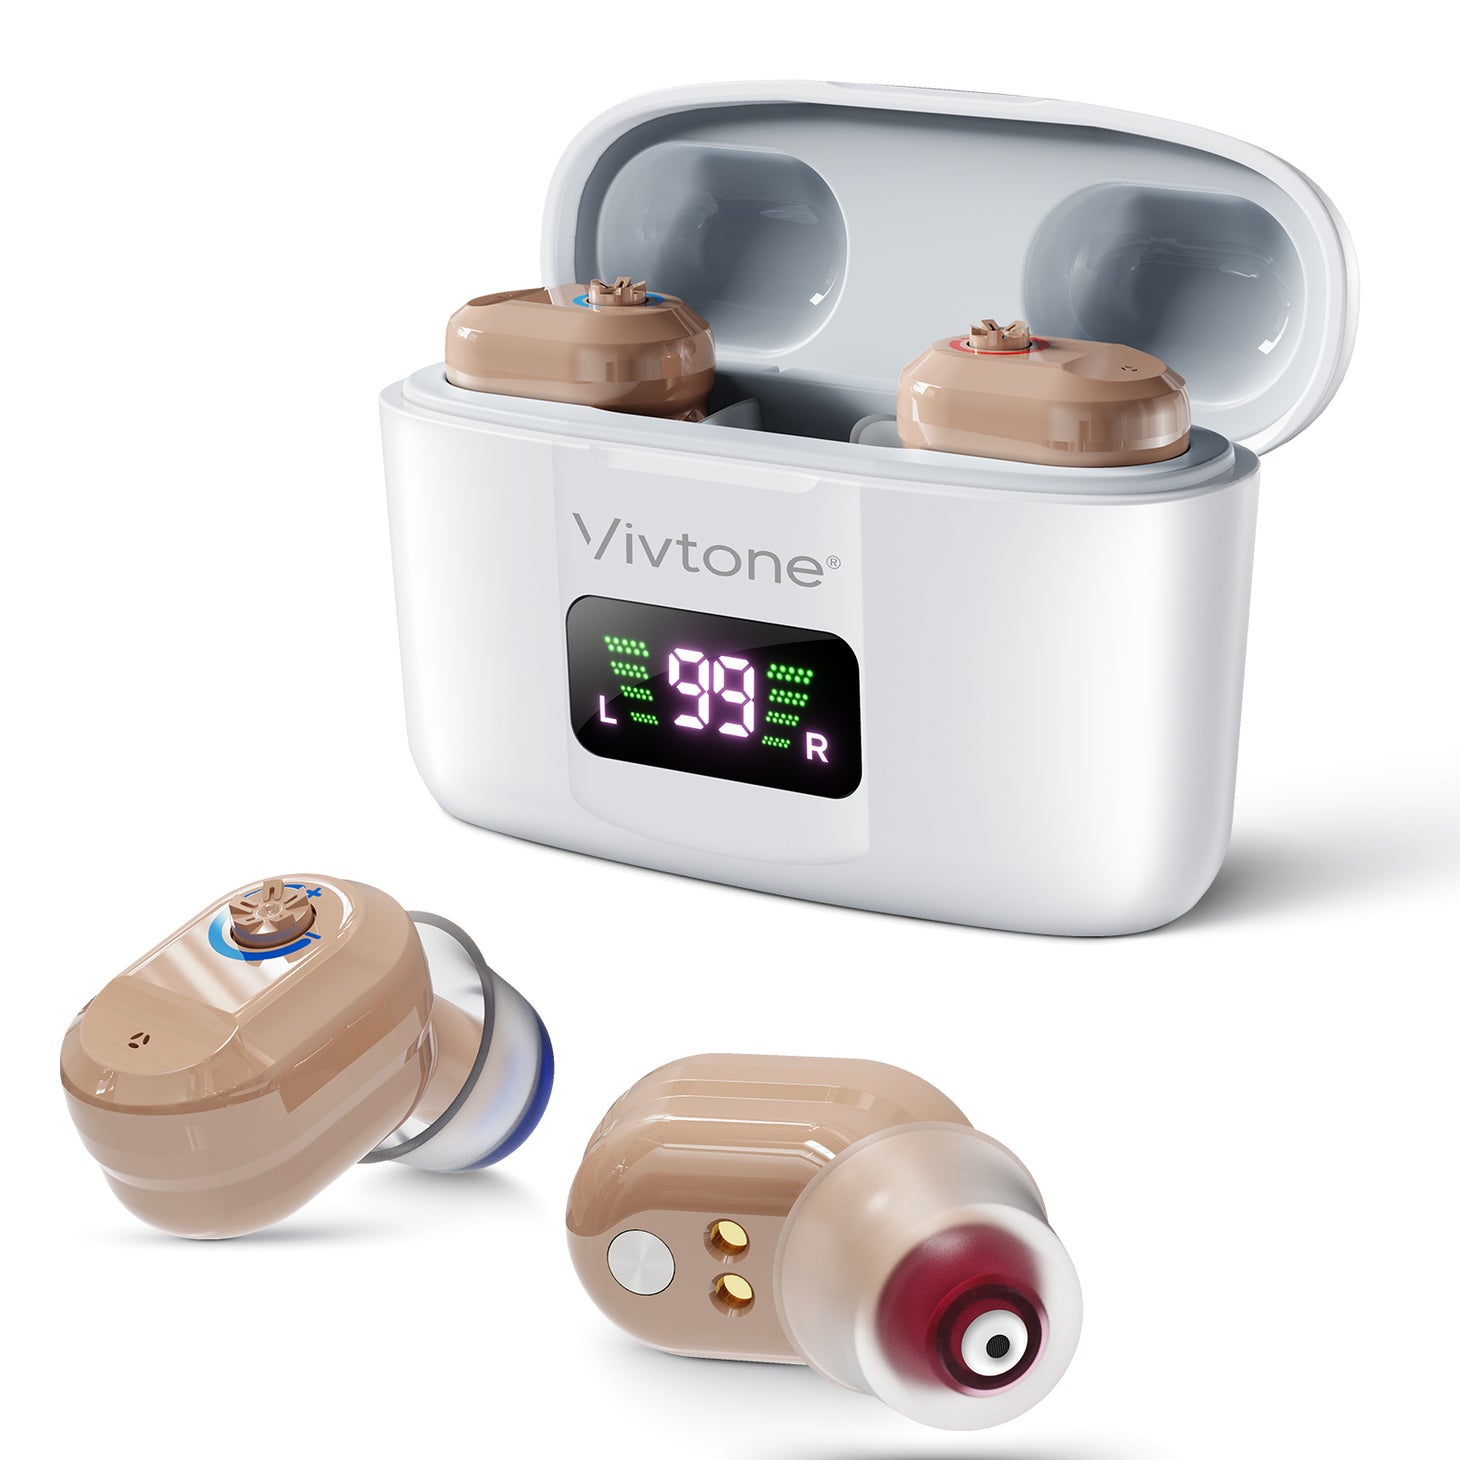 affordable rechargeable hearing aids